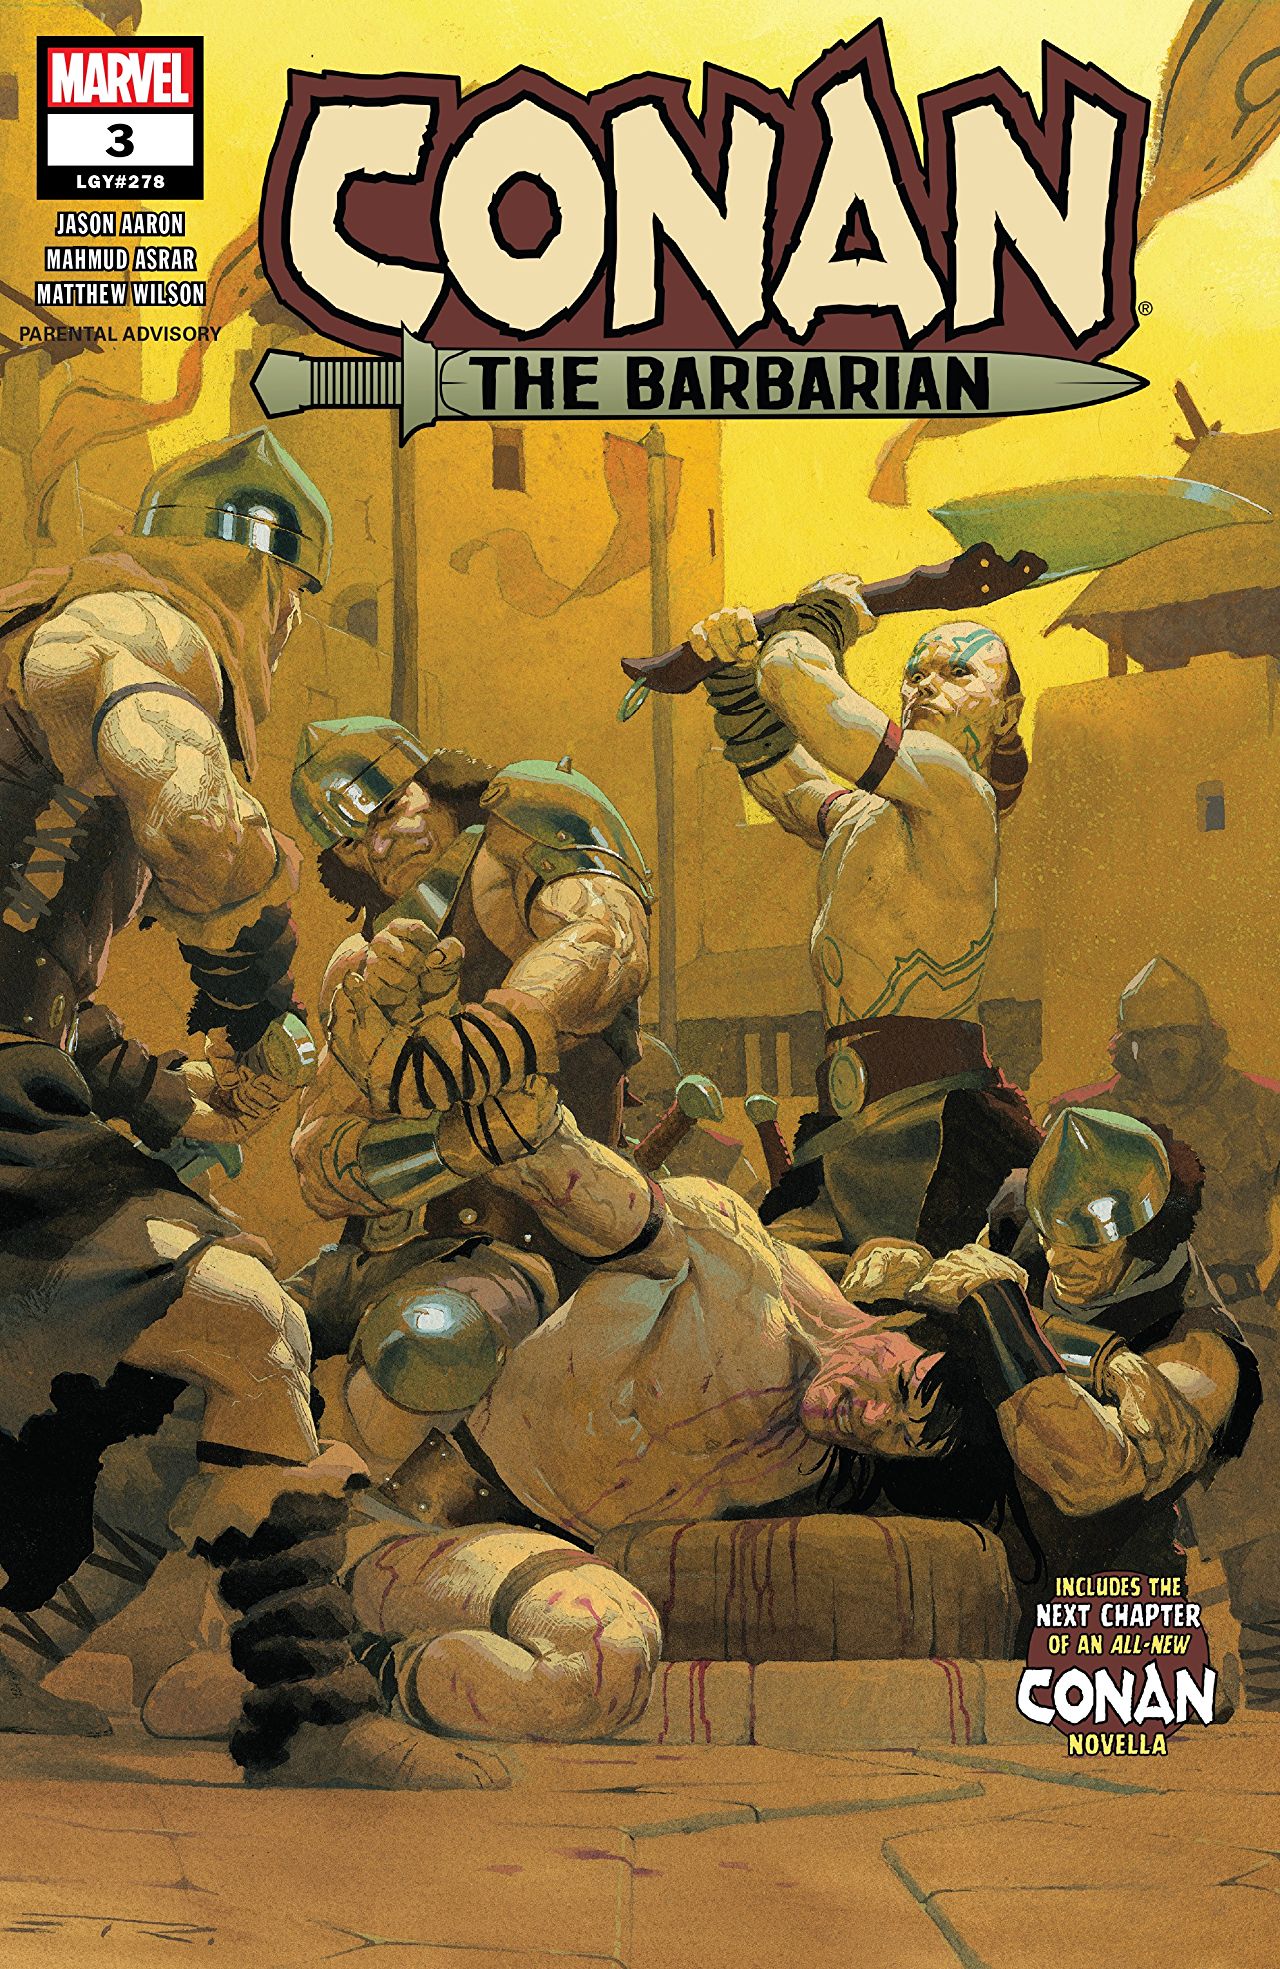 Image result for Marvel previews conan the barbarian #3 2019